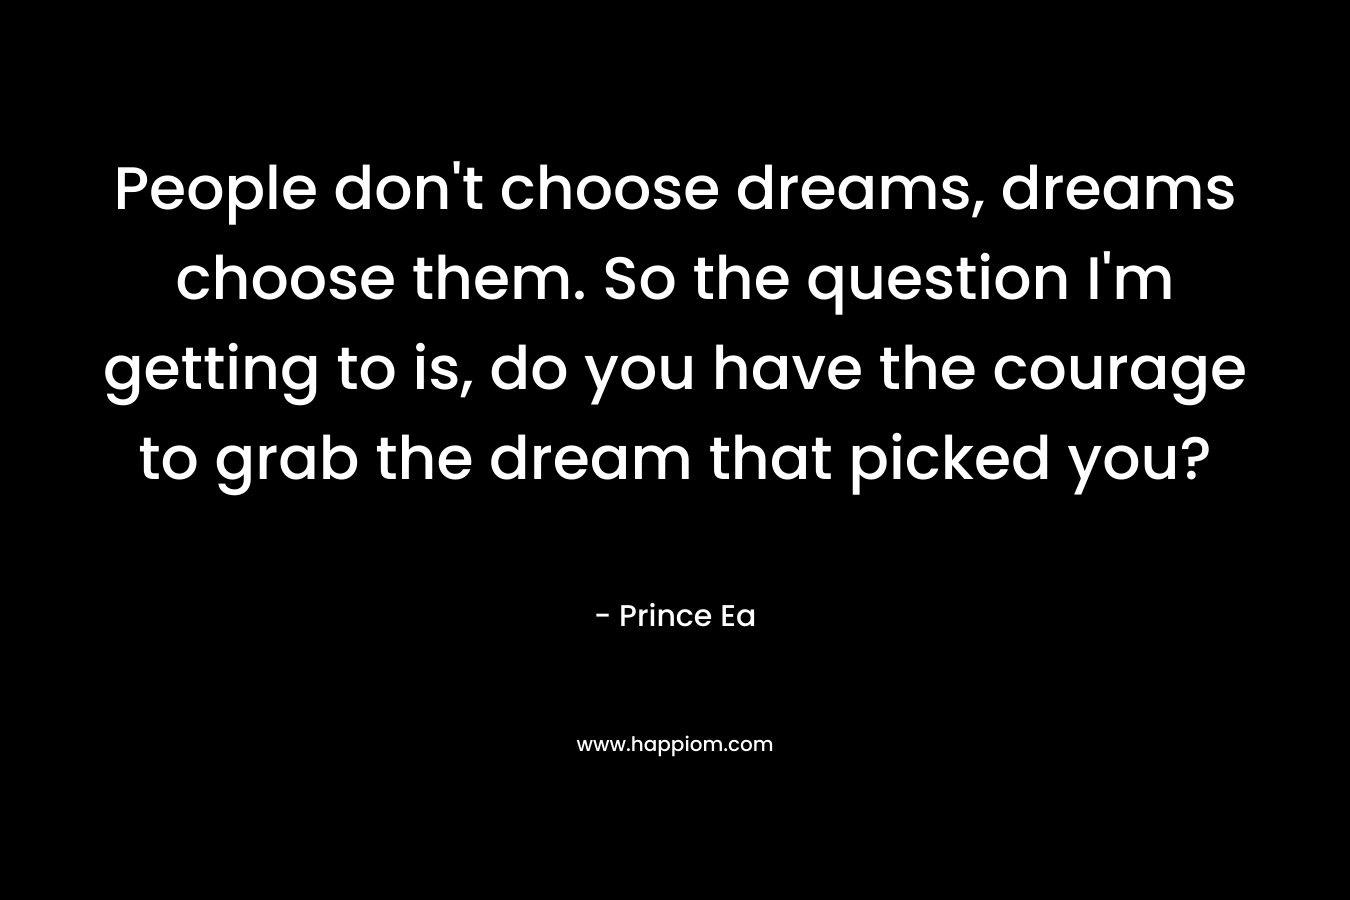 People don’t choose dreams, dreams choose them. So the question I’m getting to is, do you have the courage to grab the dream that picked you? – Prince Ea